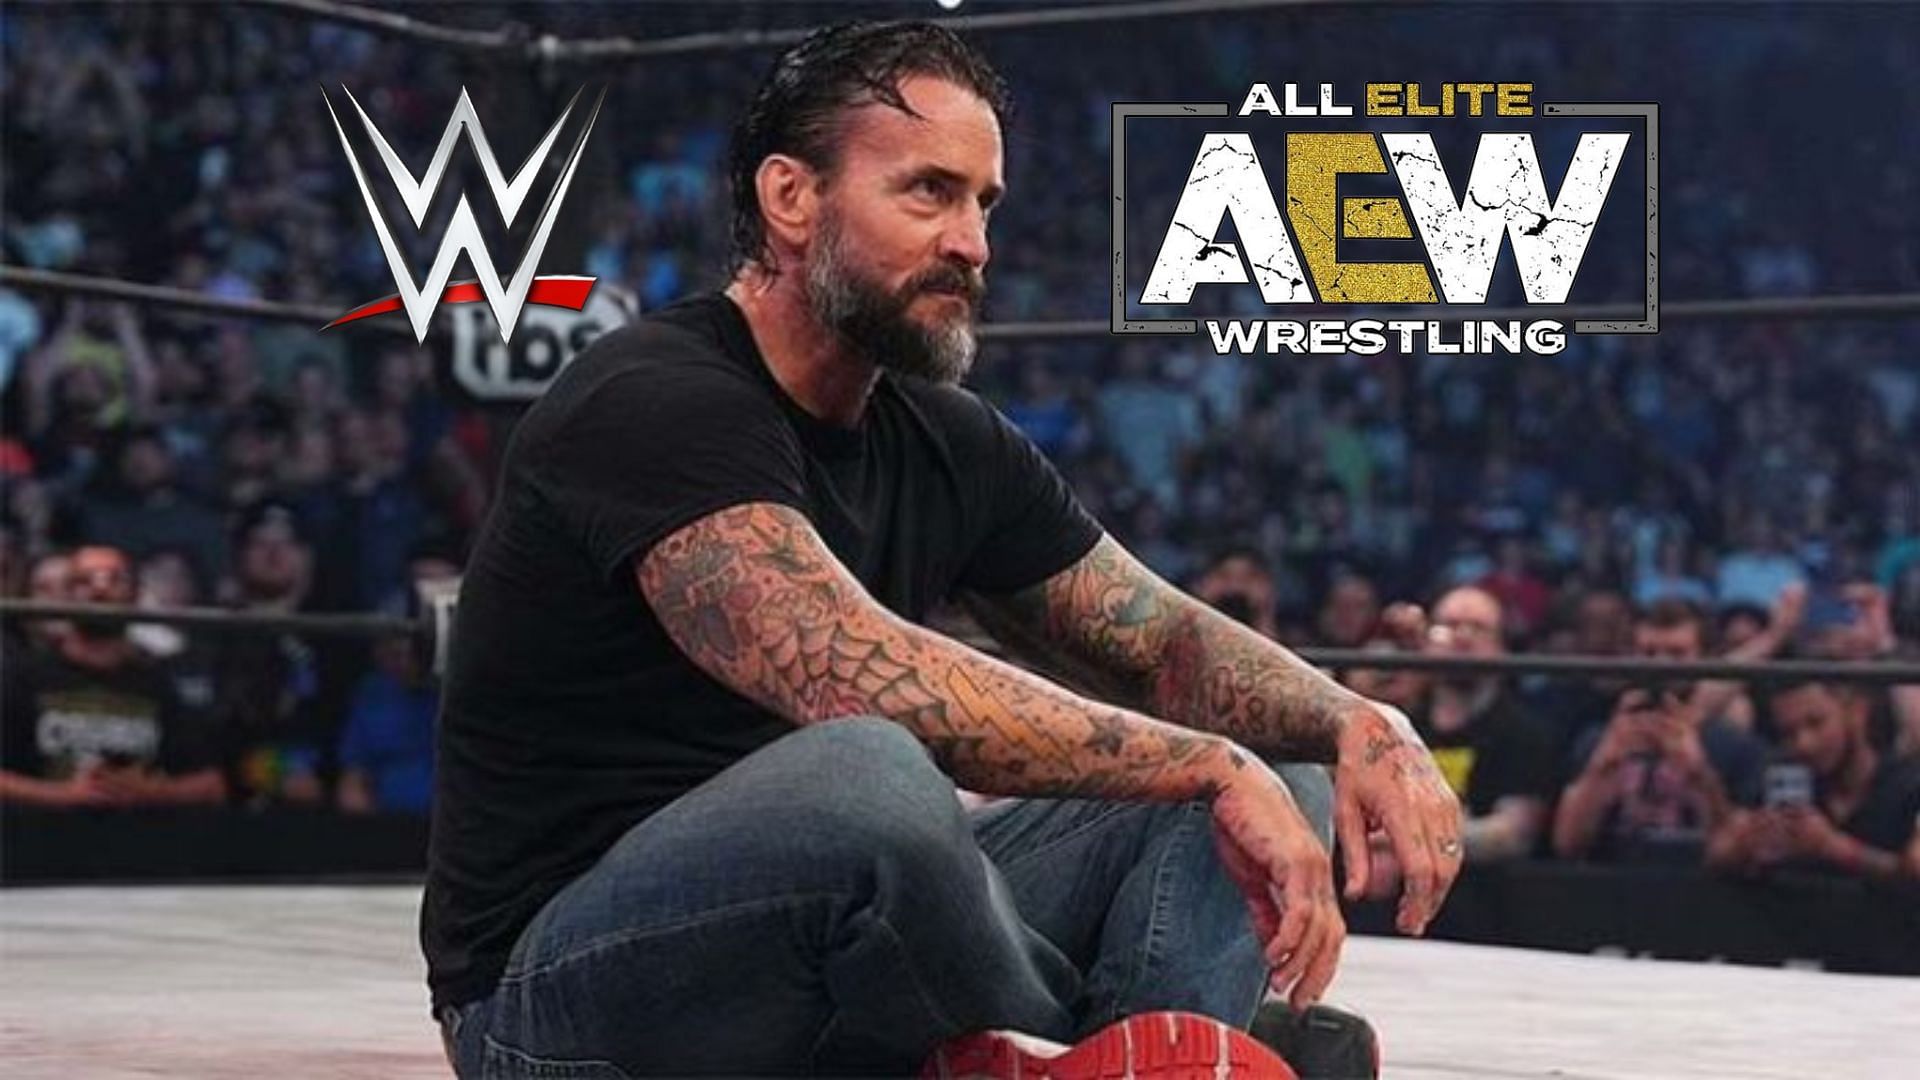 A rumor has been swirling that CM Punk might return to WWE if his AEW run comes to an end.